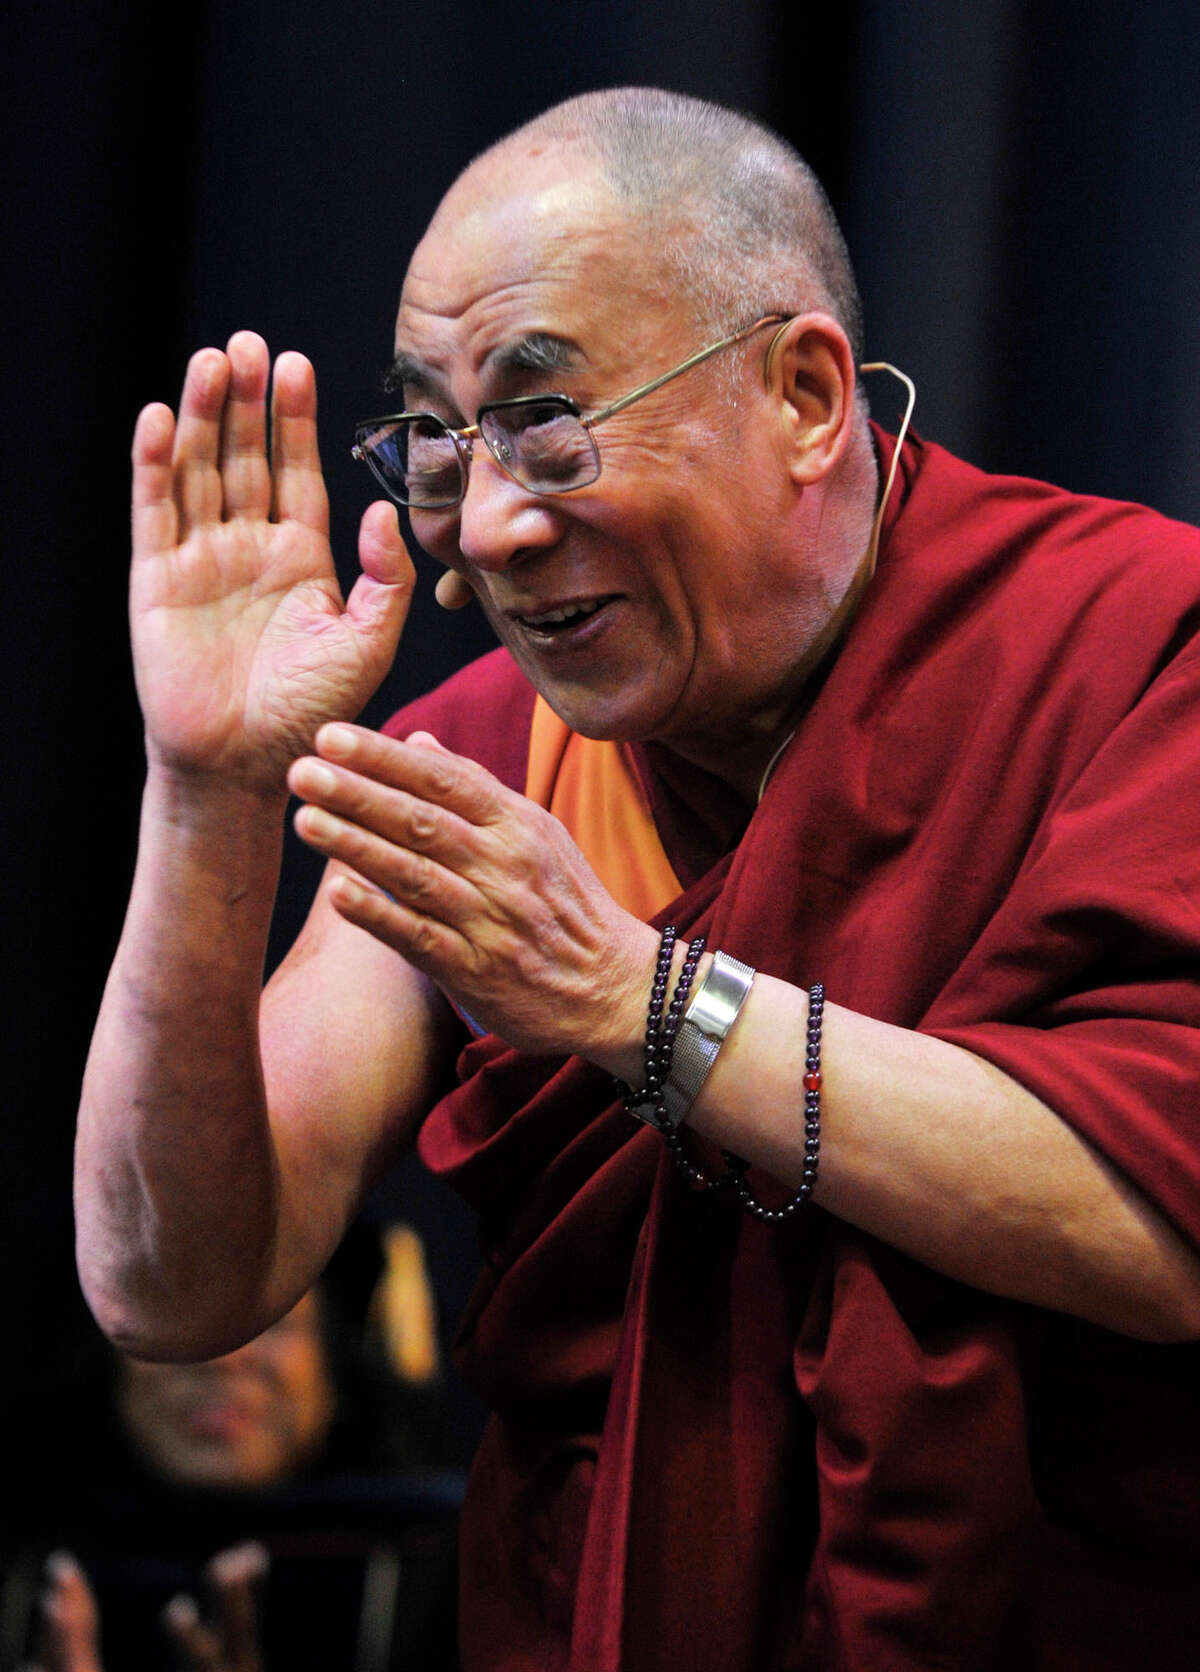 The Dalai Lama greets the crowd at the O'Neill Center before giving his speech "Advice for Daily Life" on Western Connecticut State University's westside campus in Danbury on Friday, Oct. 19, 2012.